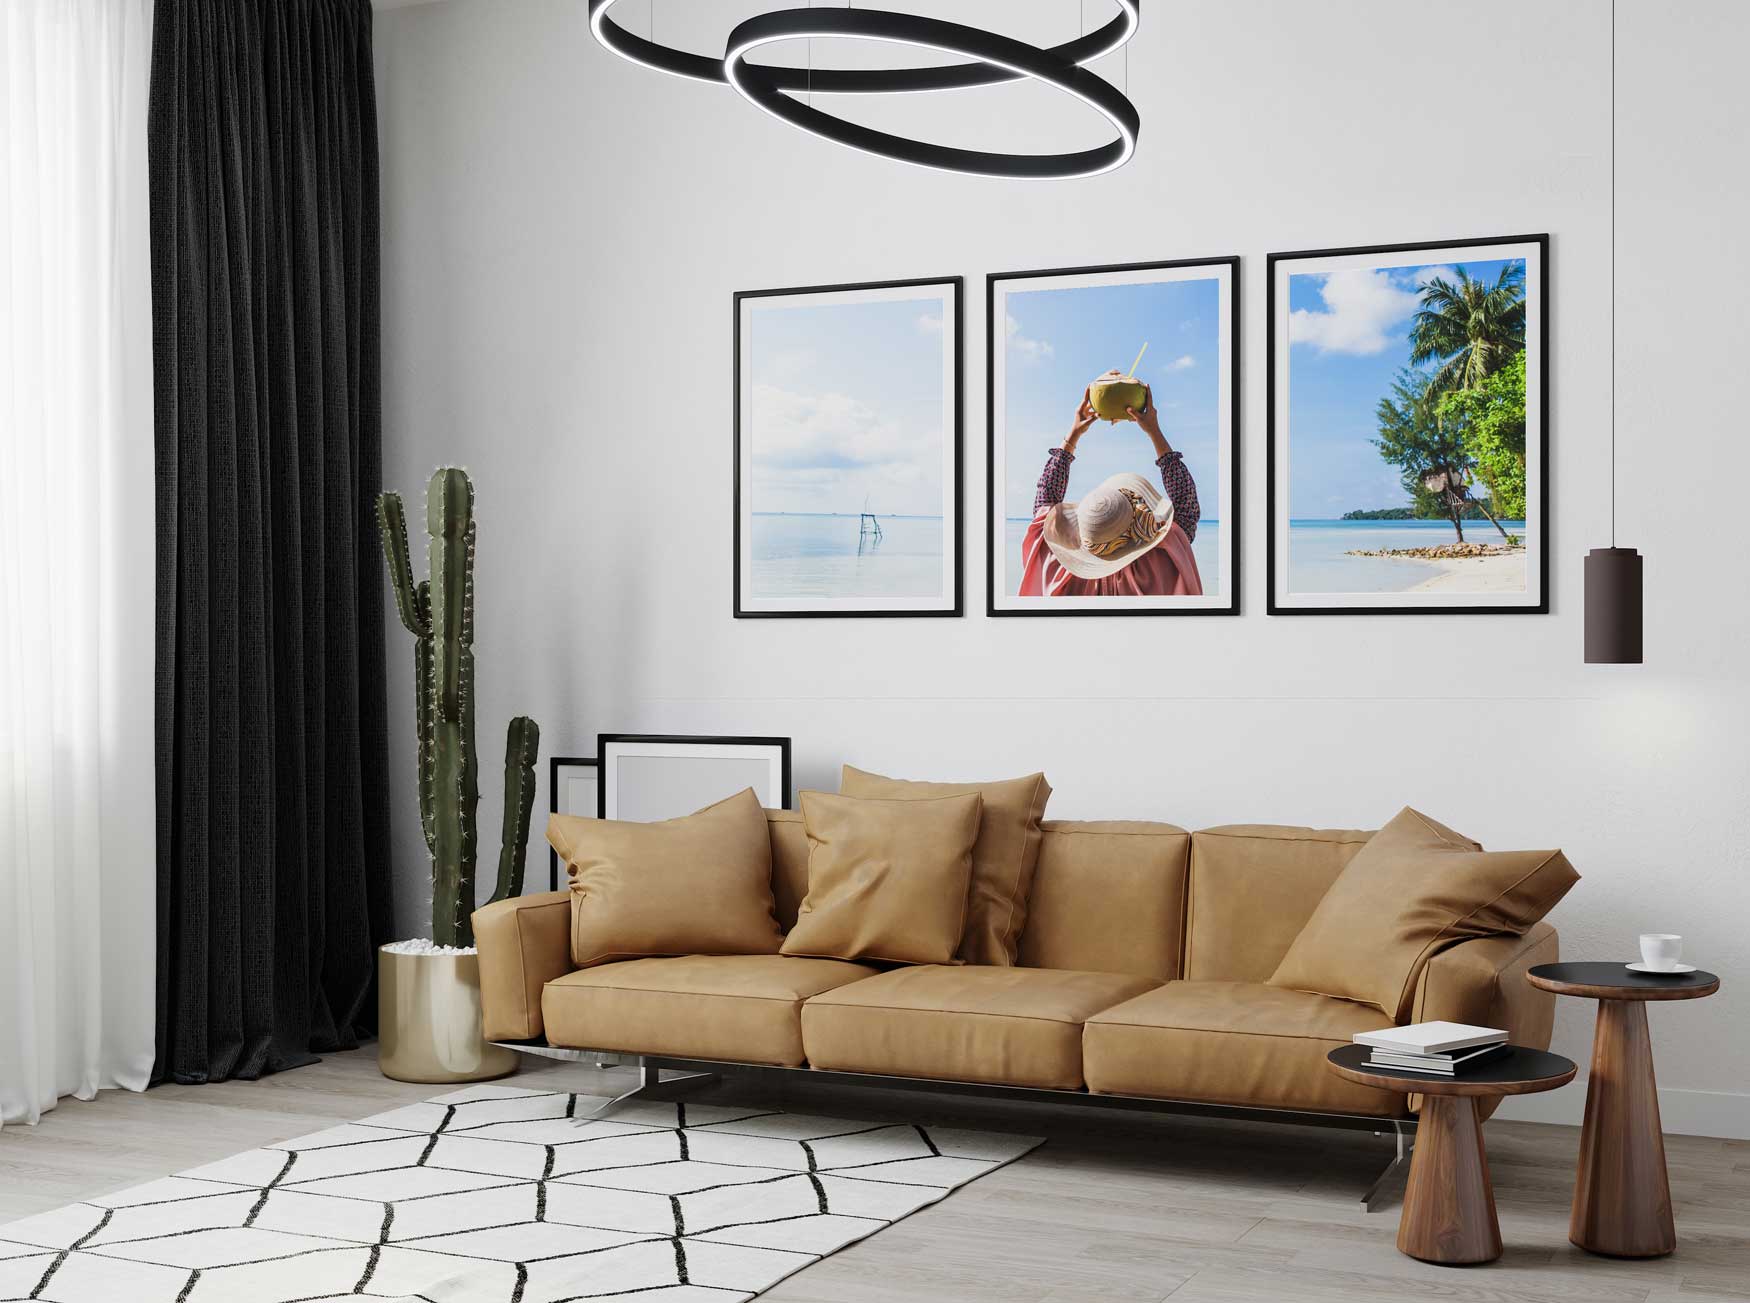 modern living room with a big sofa. 3 piece photo art of a girl on the beach.